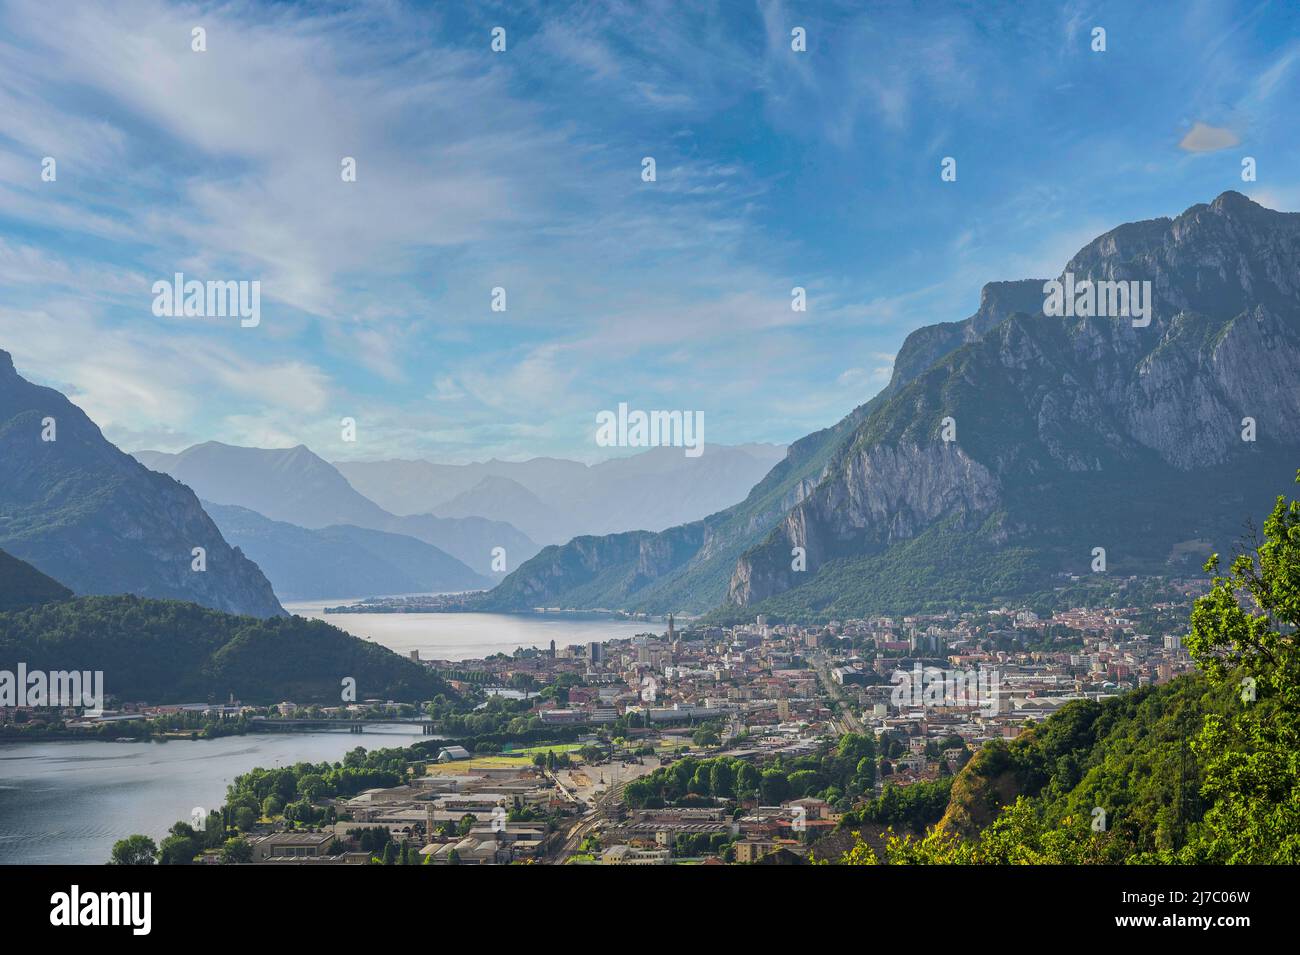 City of Lecco and Lake Como with mountains seen from the castle of the Innominato, Lecco, Italy Stock Photo